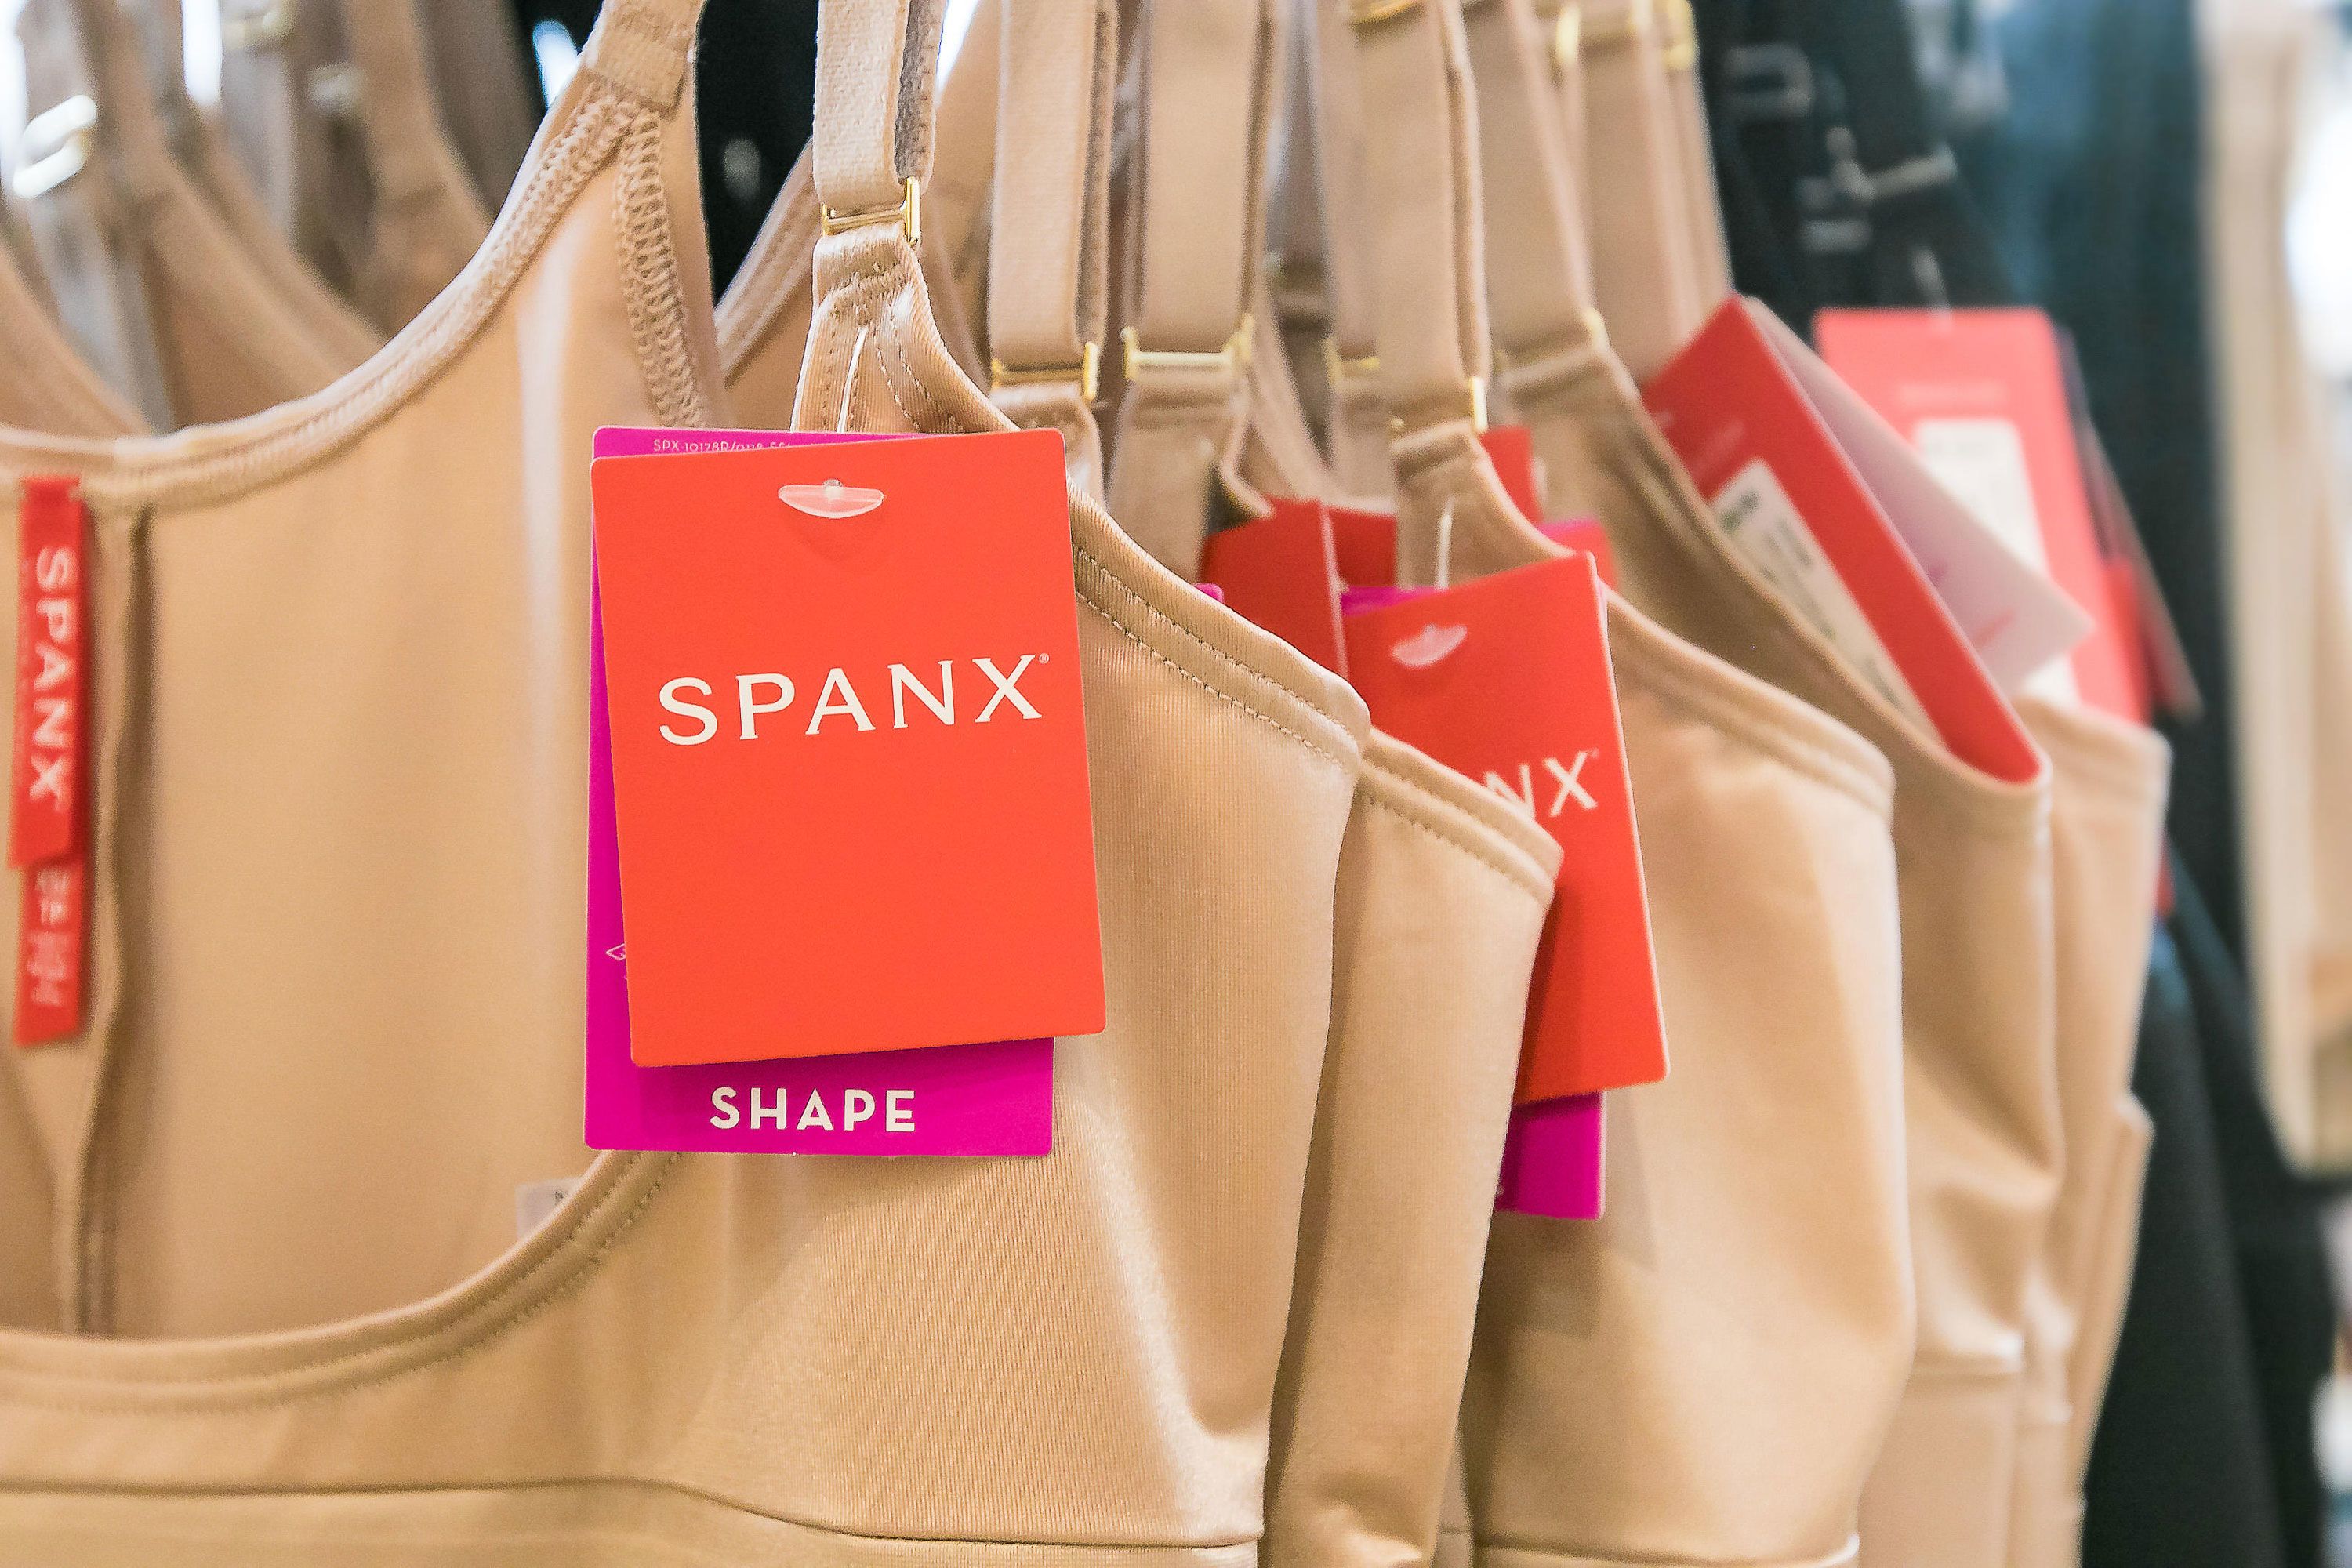 Spanx: Meet the Red Backpack Brigade! - Boulo Solutions